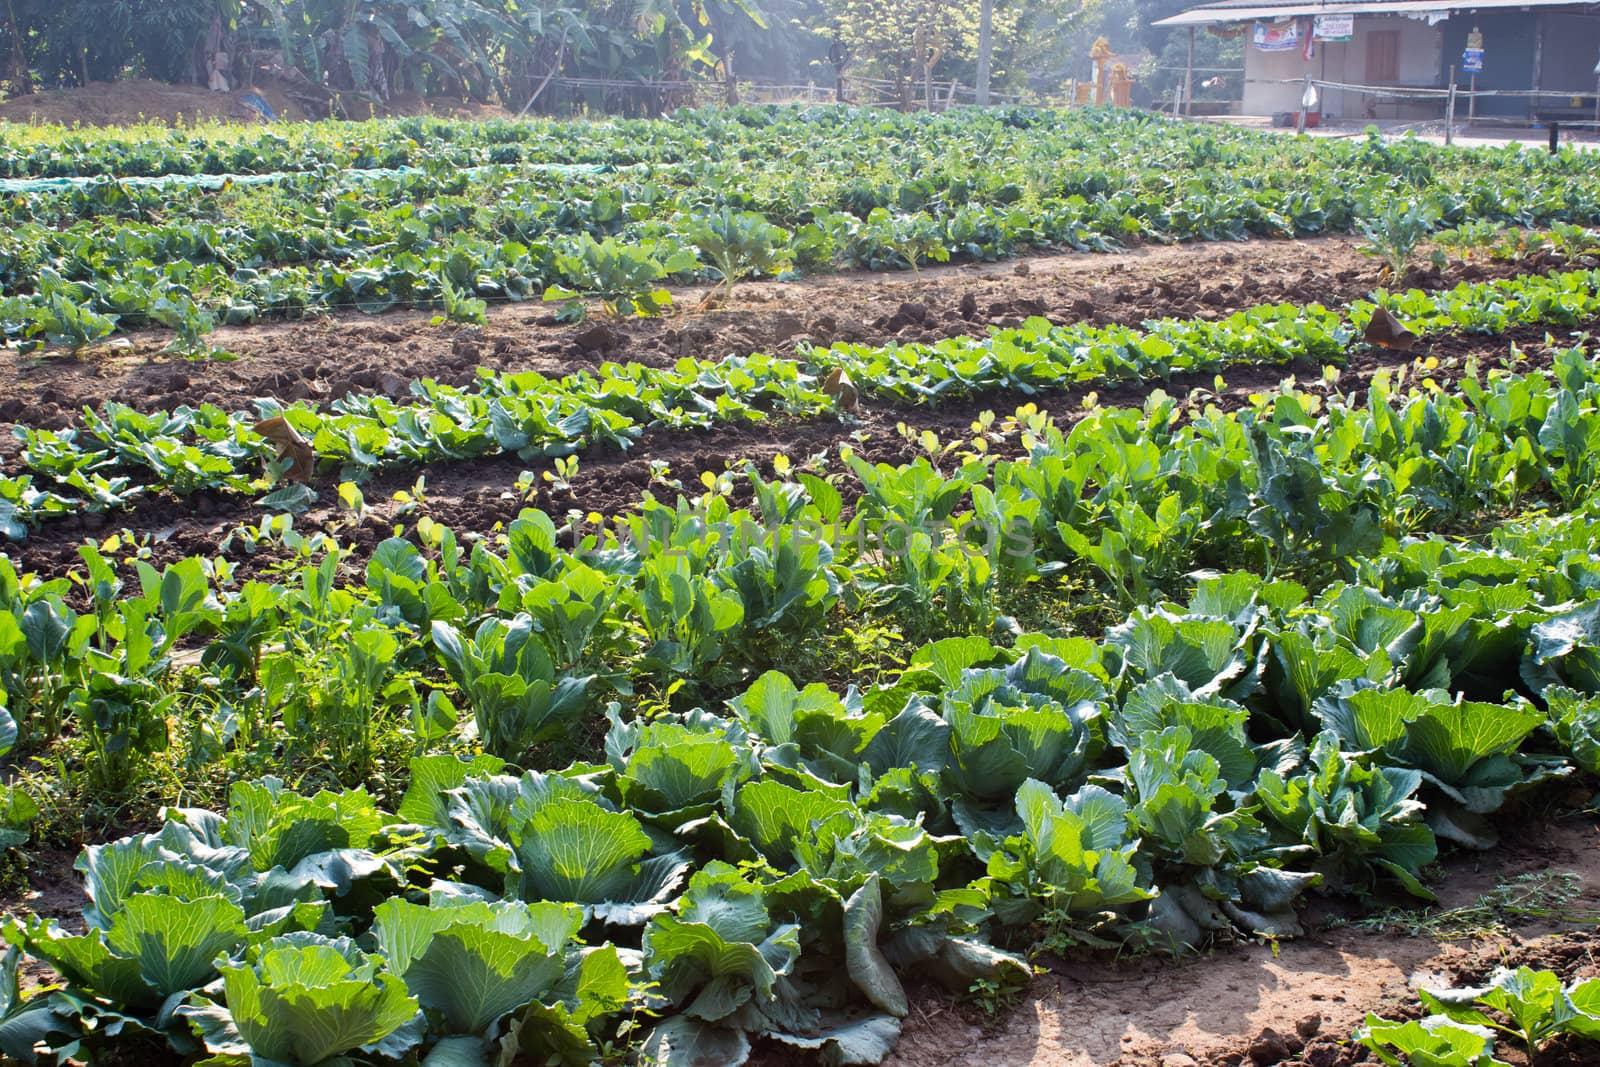 Cabbage garden.
The vegetables are healthy and non-toxic.